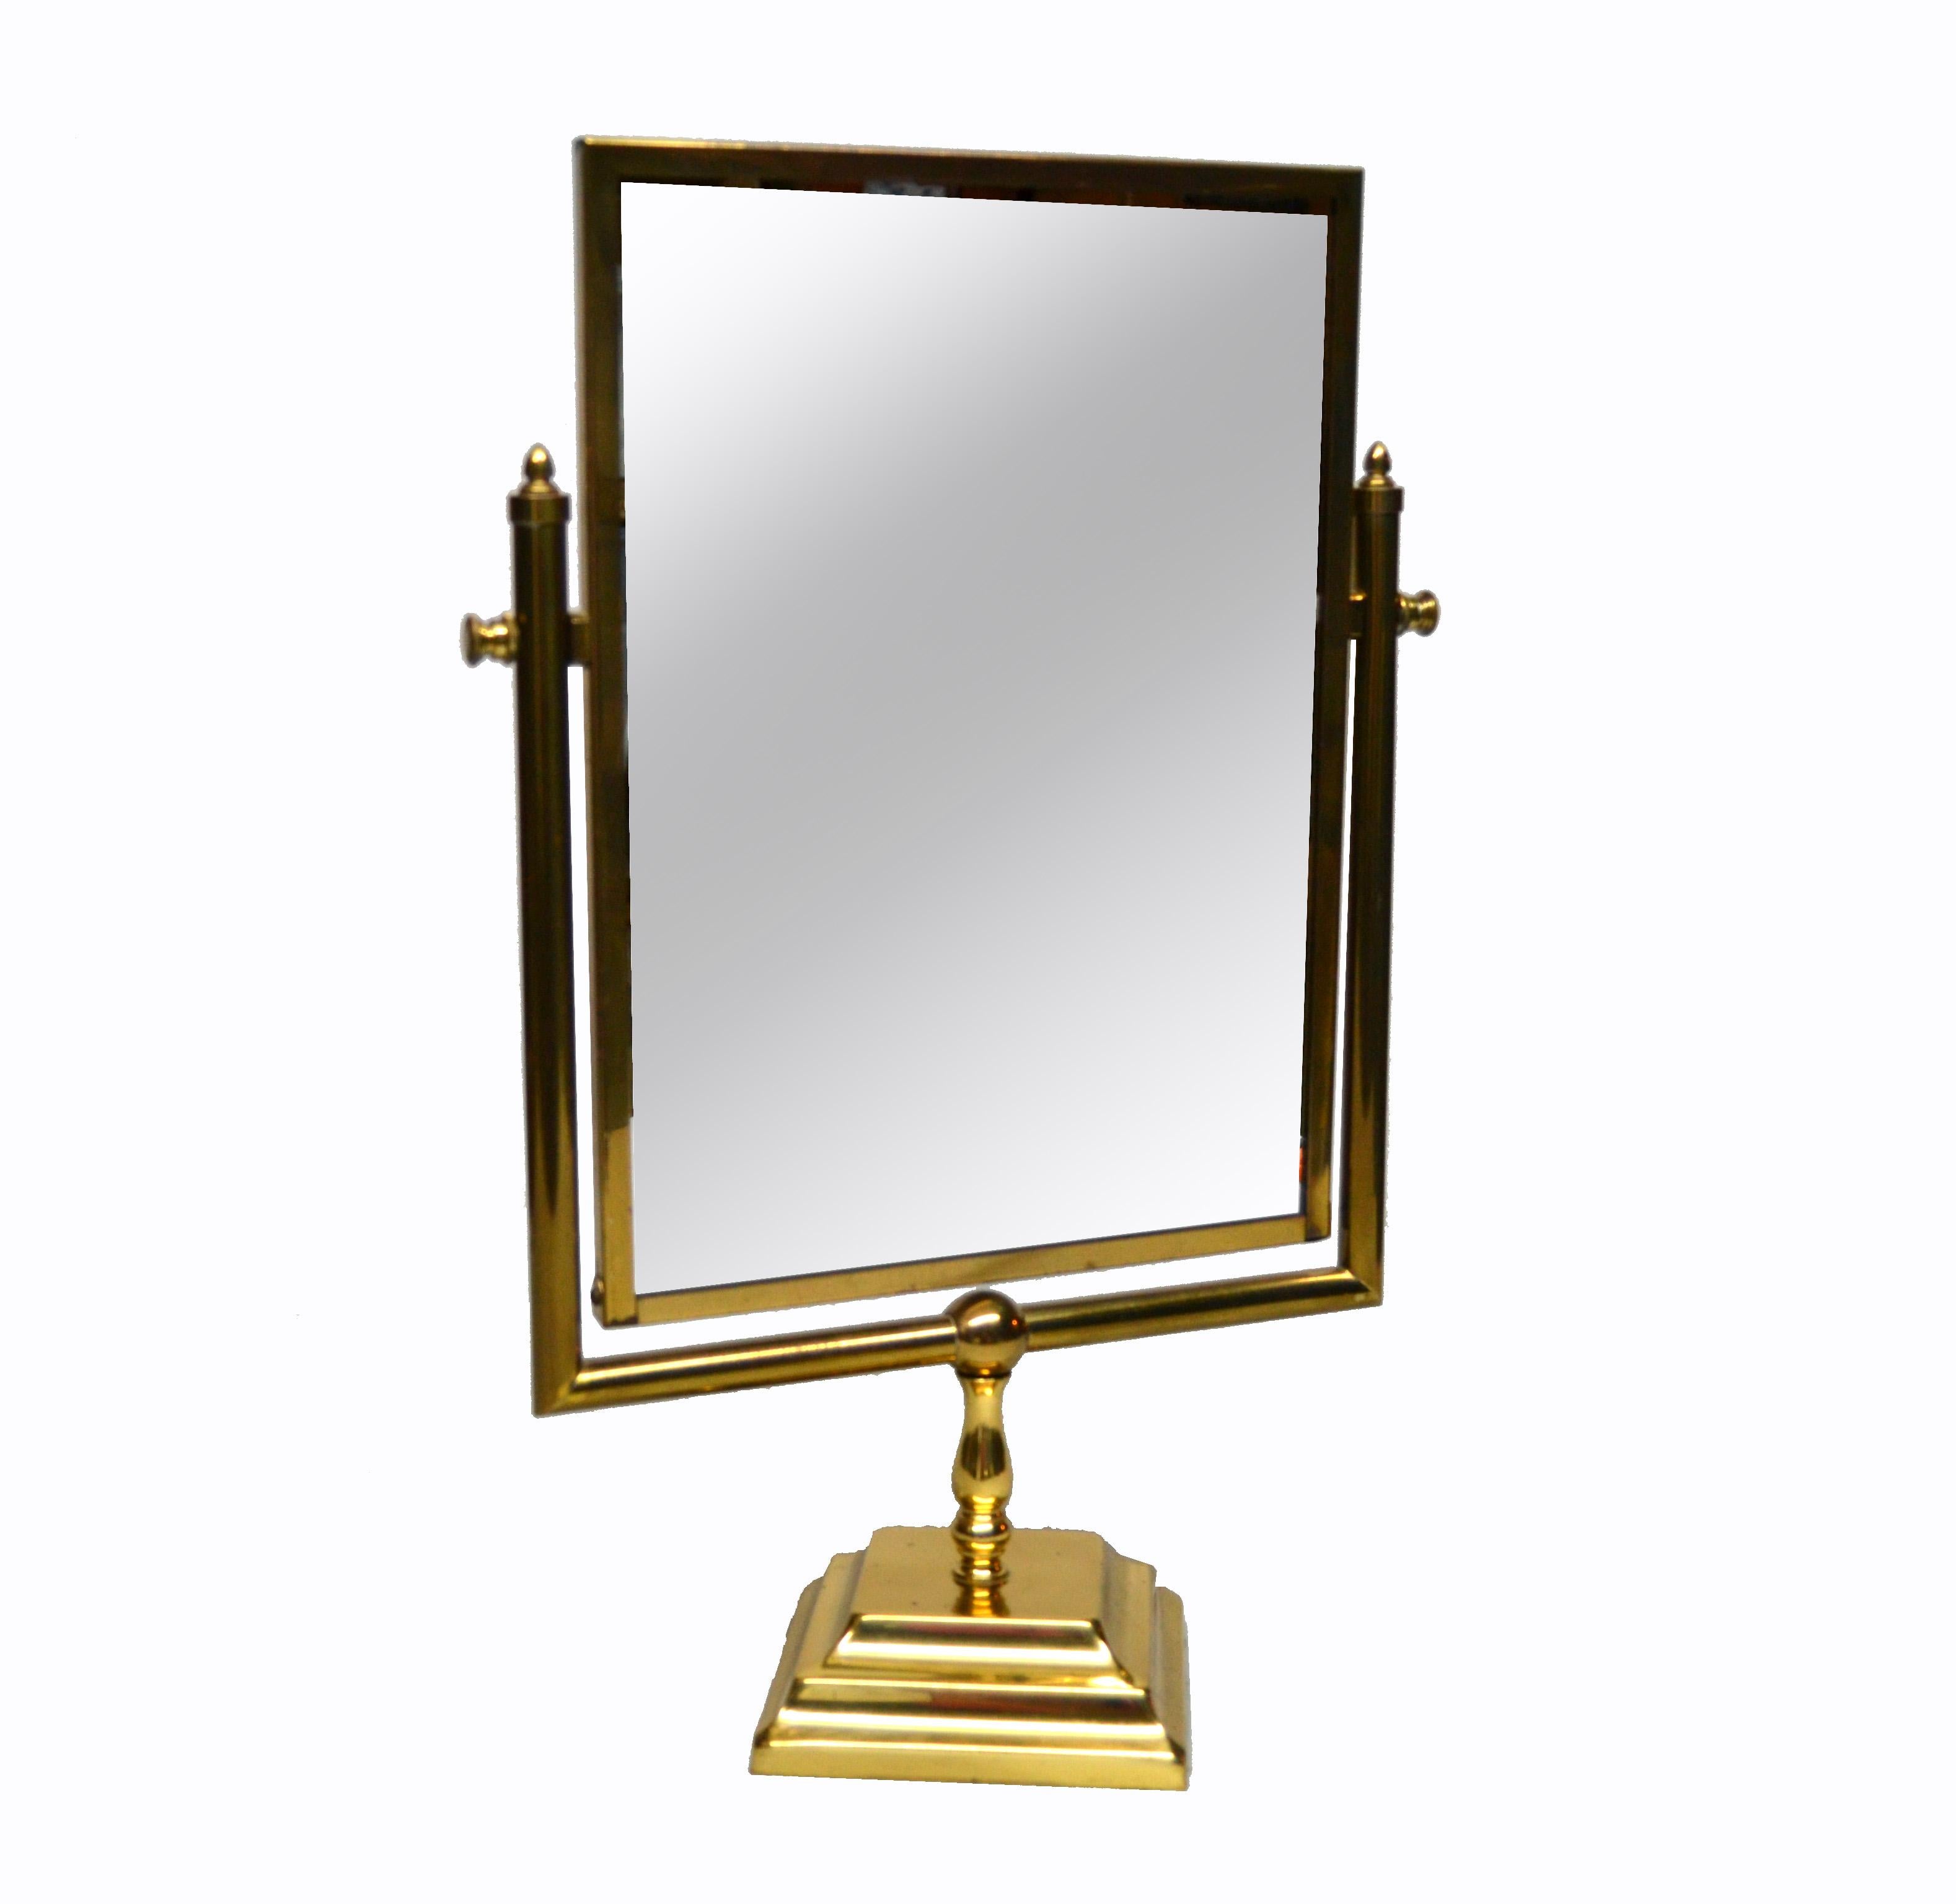 Lovely Mid-Century Modern desktop bronze two-sided vanity mirror. 
Decorated with detailed brass hardware and mounted on a Bronze base.
Can be directed to different angles.
Mirror size: 9 inches x 13.25 inches.